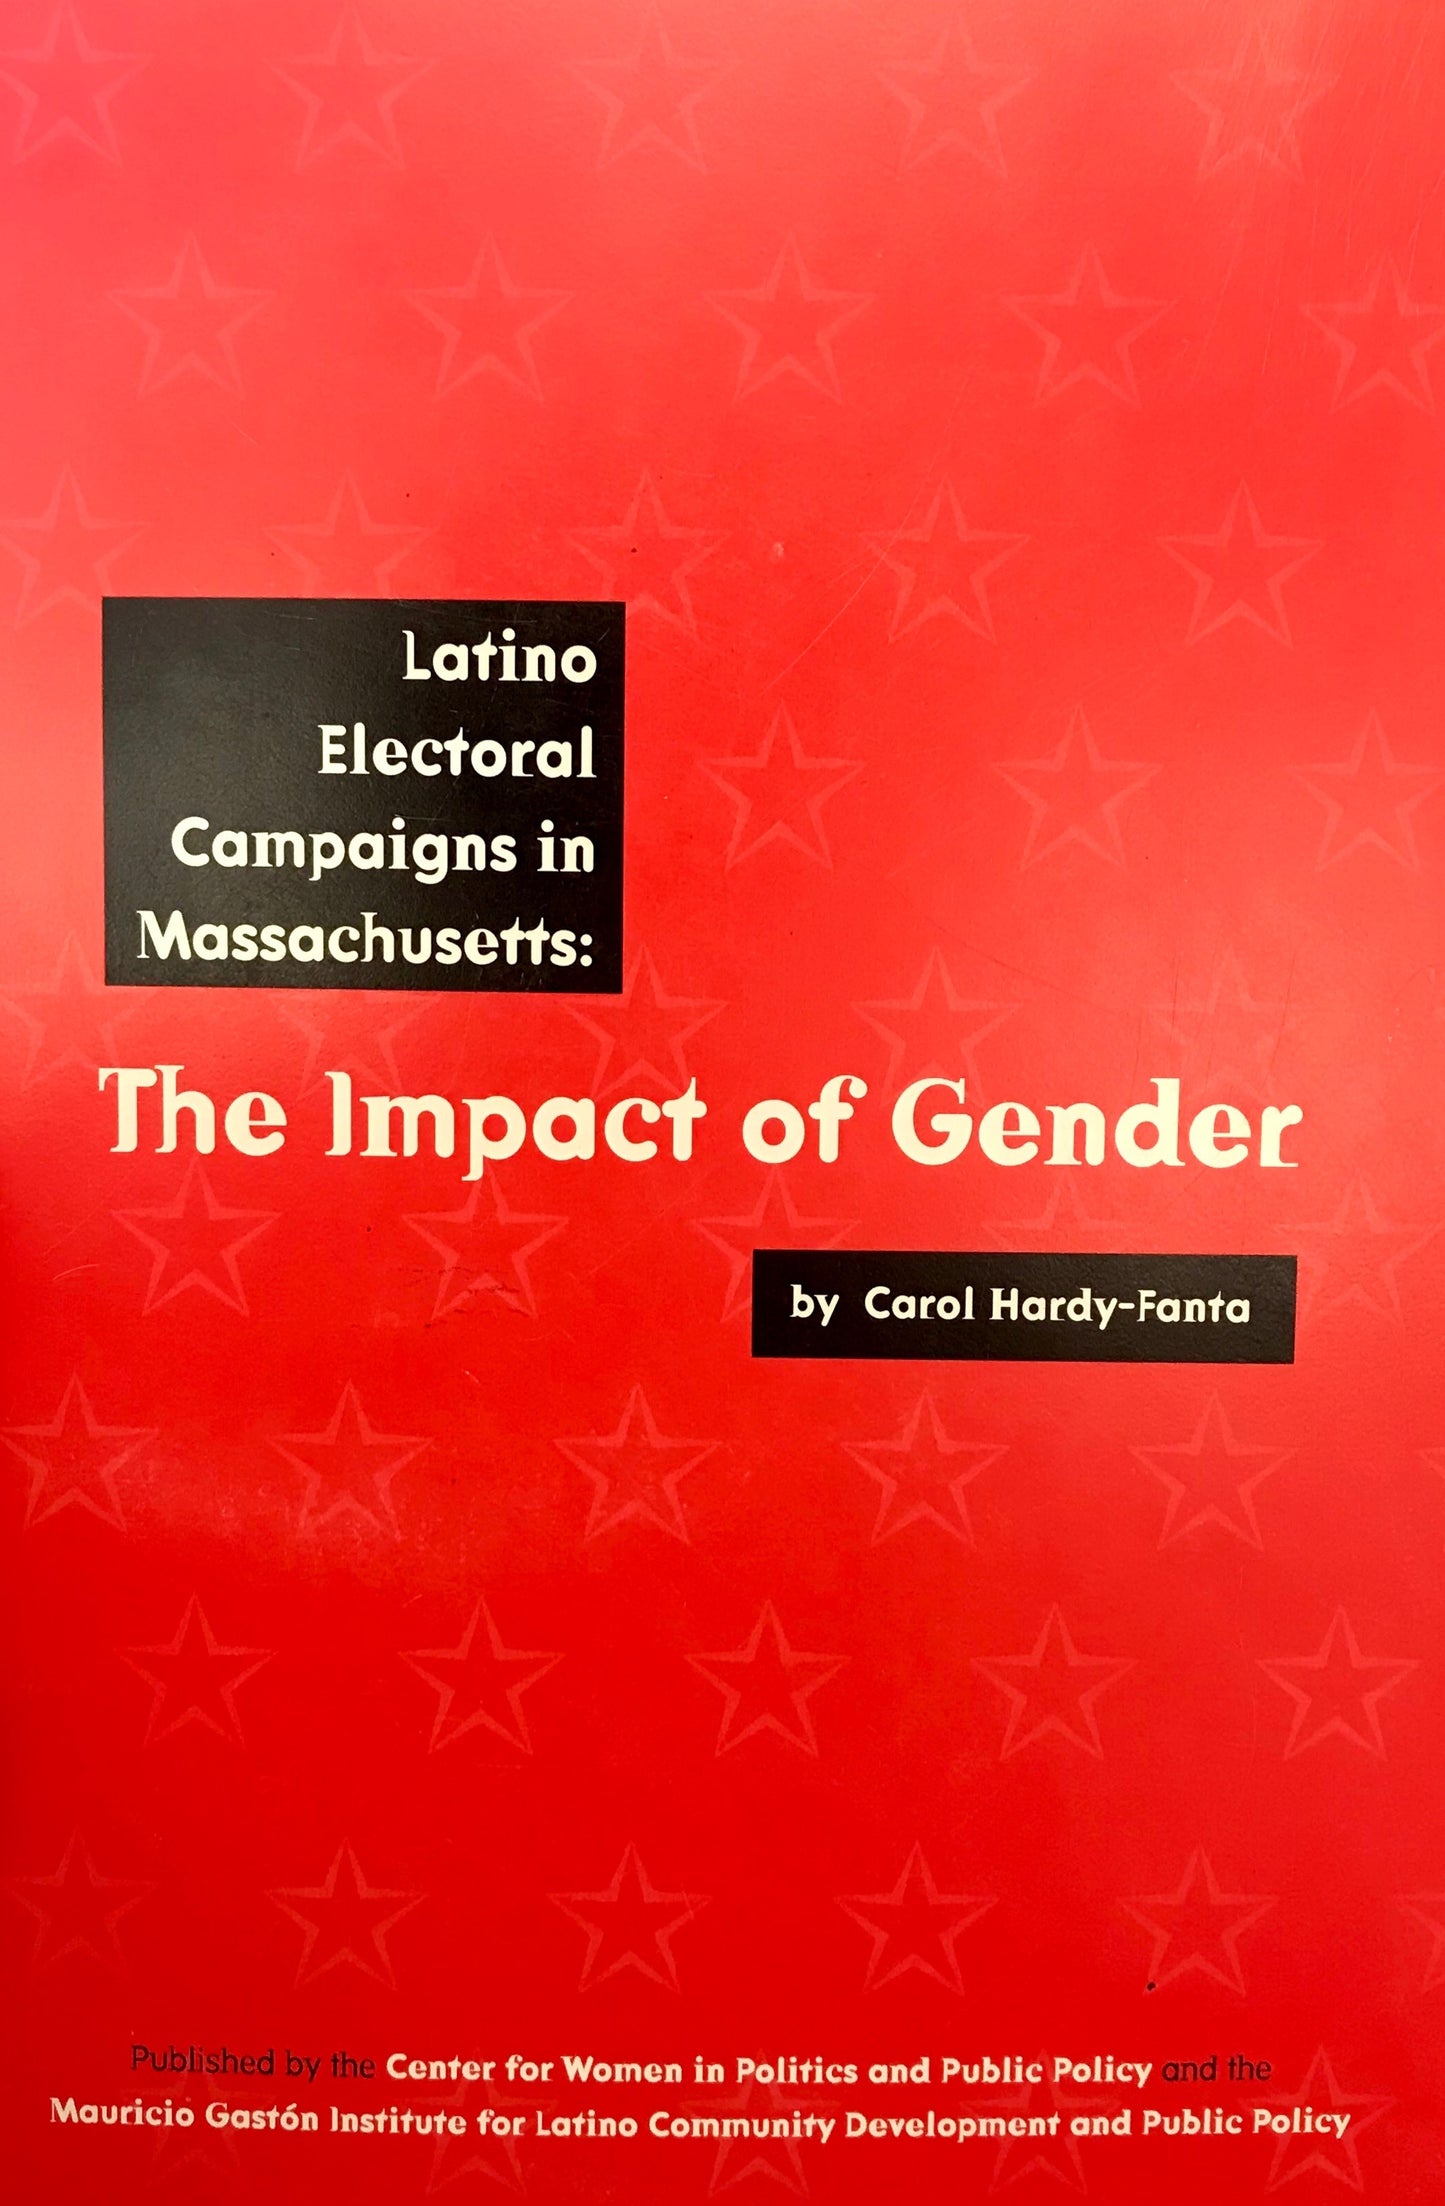 The Impact of Gender: Latino Electoral Campaigns in Massachusetts by Carol Hardy-Fanta